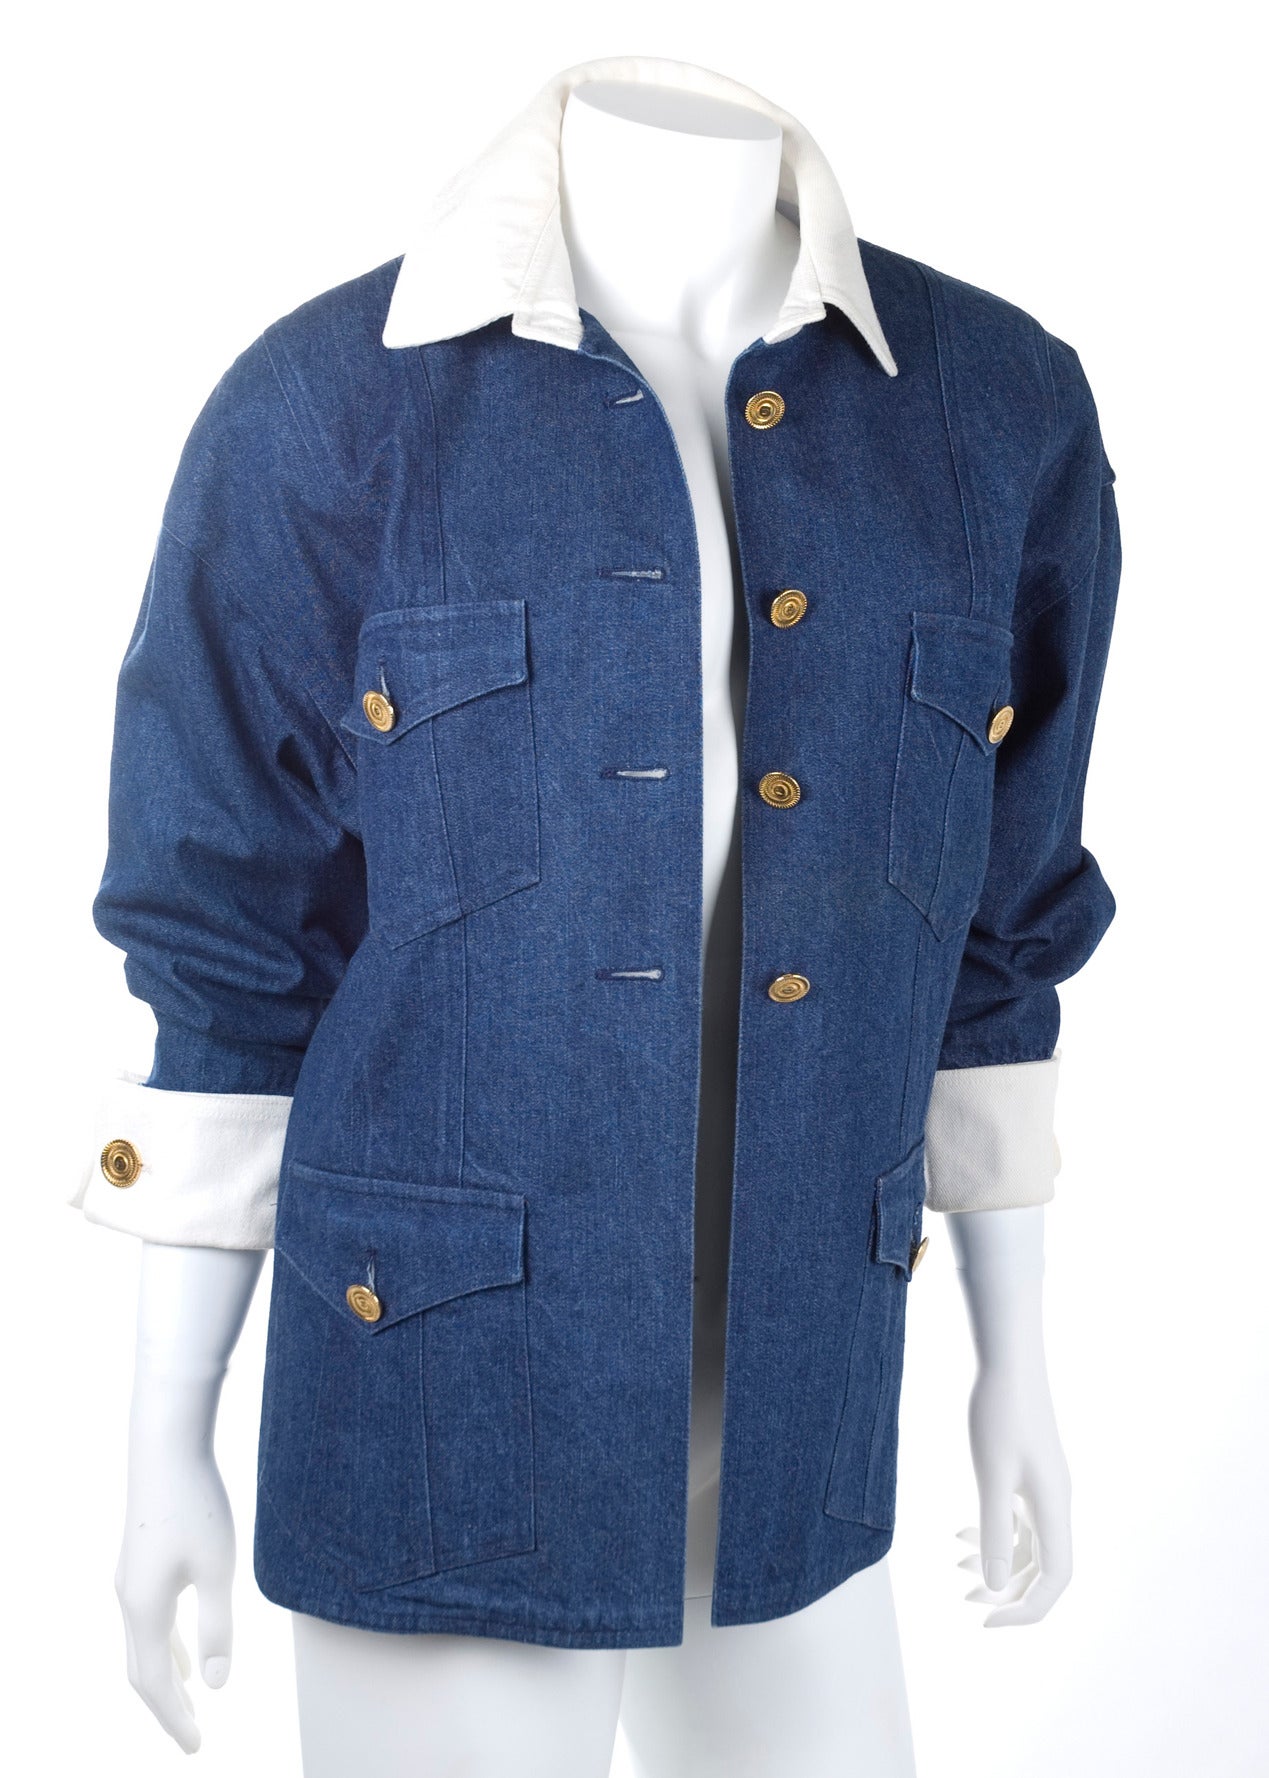 Women's Chanel Jeans Shirt With White Collar and Cuffs